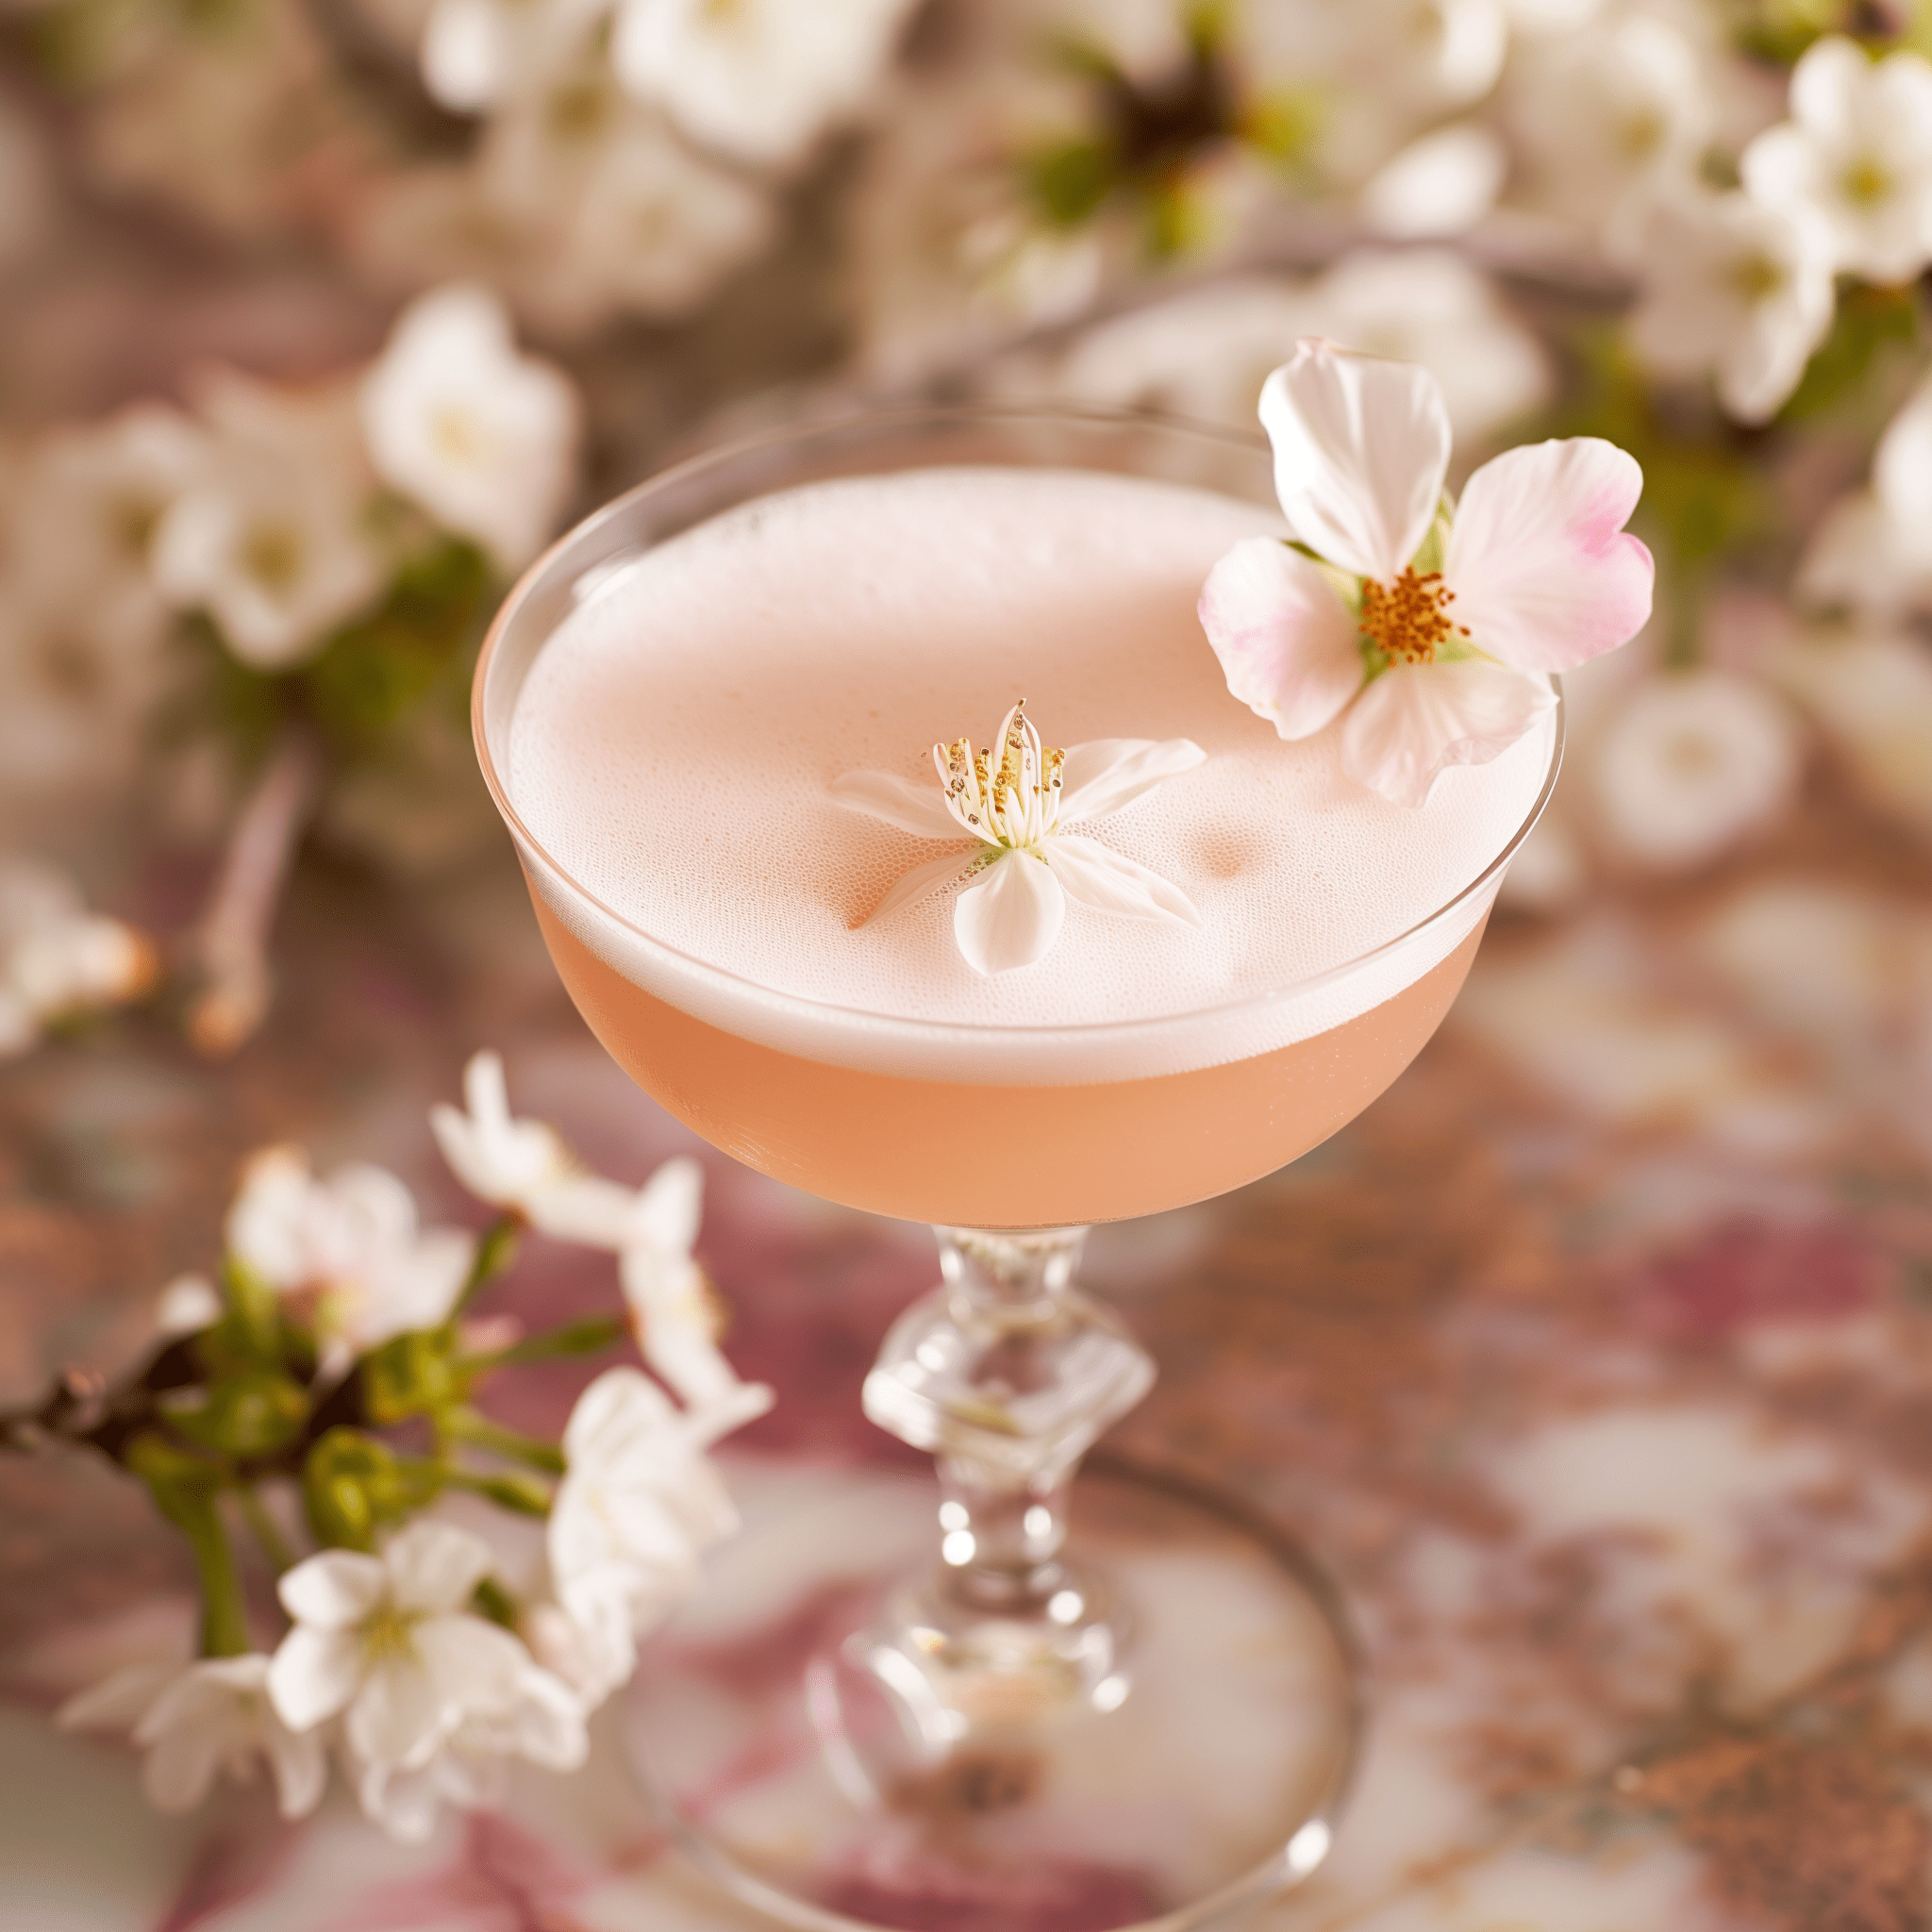 April Shower Cocktail Recipe - The April Shower cocktail offers a harmonious blend of botanical, tart, and slightly sweet flavors. The gin provides a floral and herbal base, while the fresh lemon juice adds a zesty sourness that awakens the palate. The agave nectar rounds out the sharpness with its subtle sweetness, and the ruby red grapefruit juice brings a tangy yet sweet profile, making the drink both invigorating and smooth.